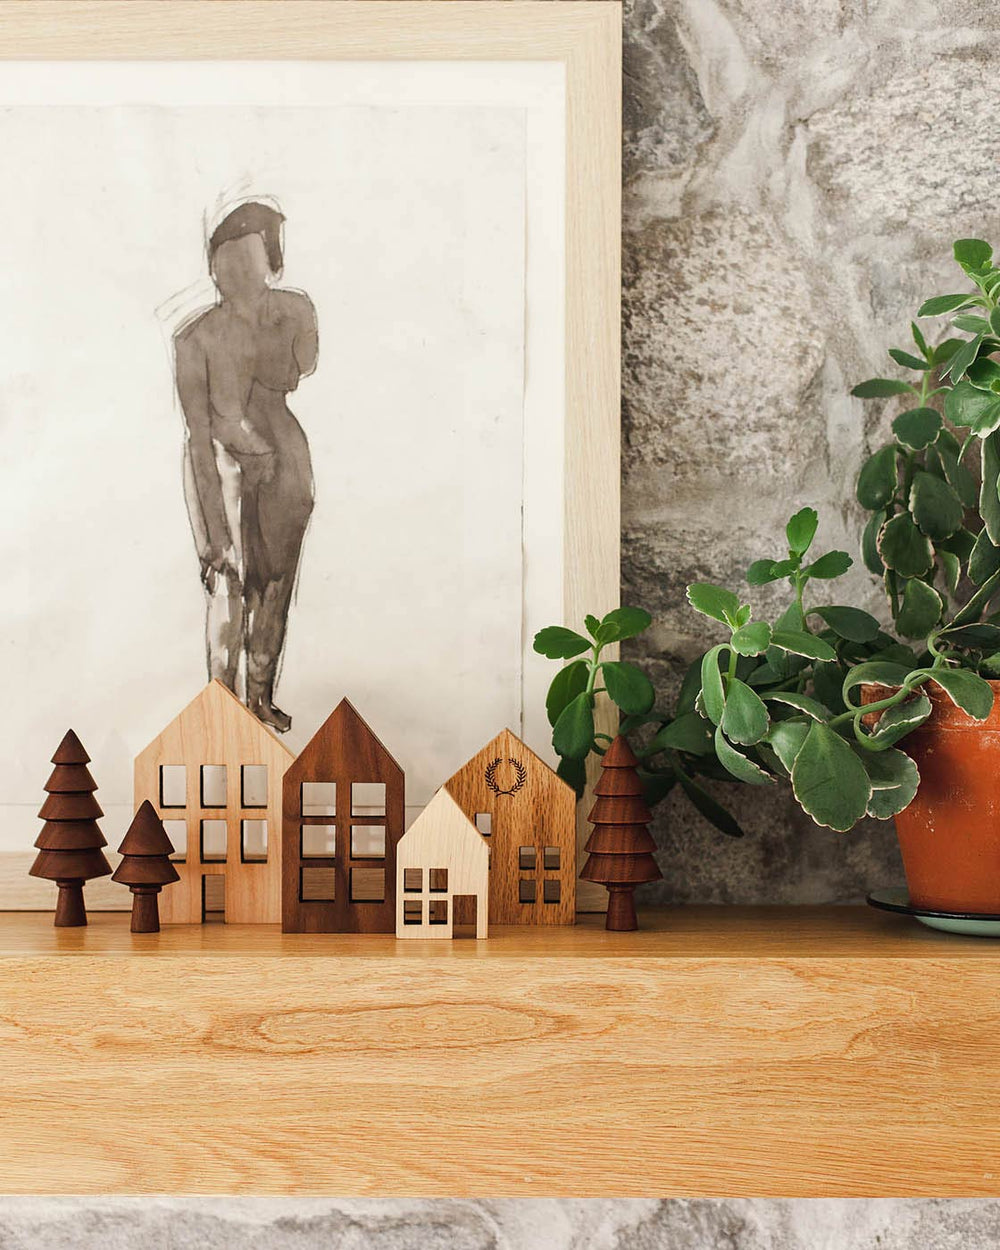 Crafted Wooden Houses - Walnut